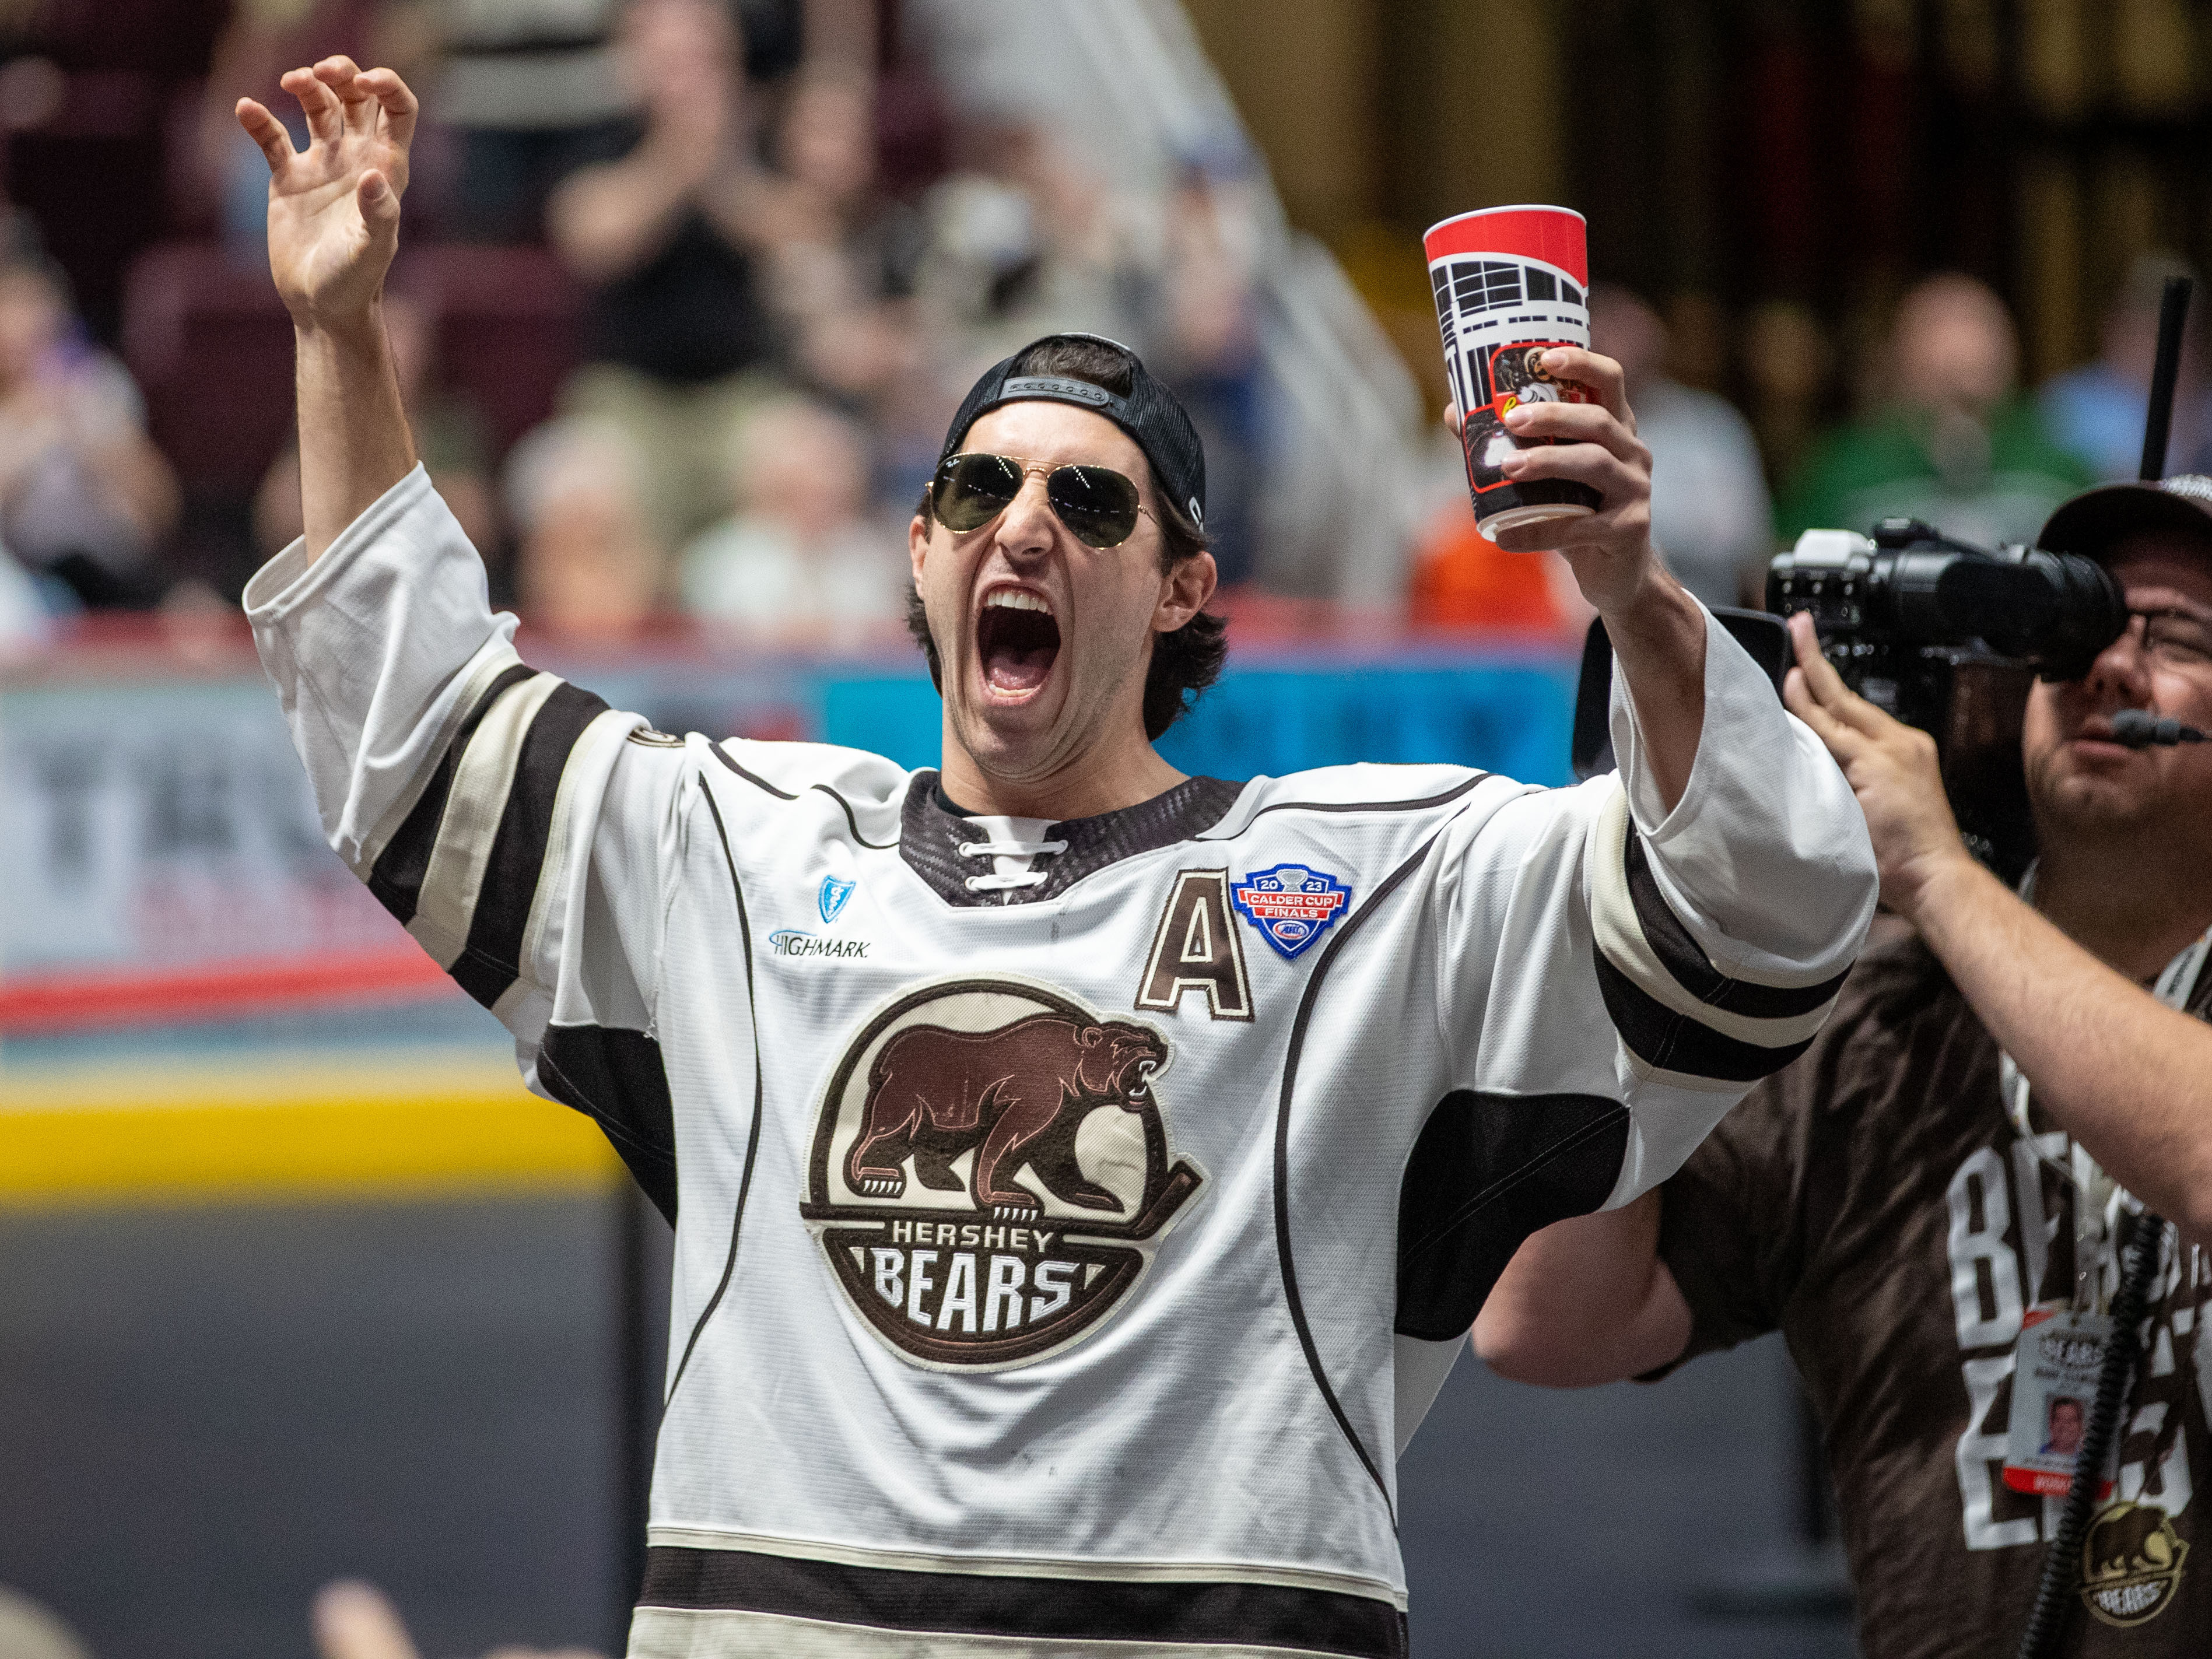 Congratulations to the Hershey Bears on winning the 2023 CalderCup